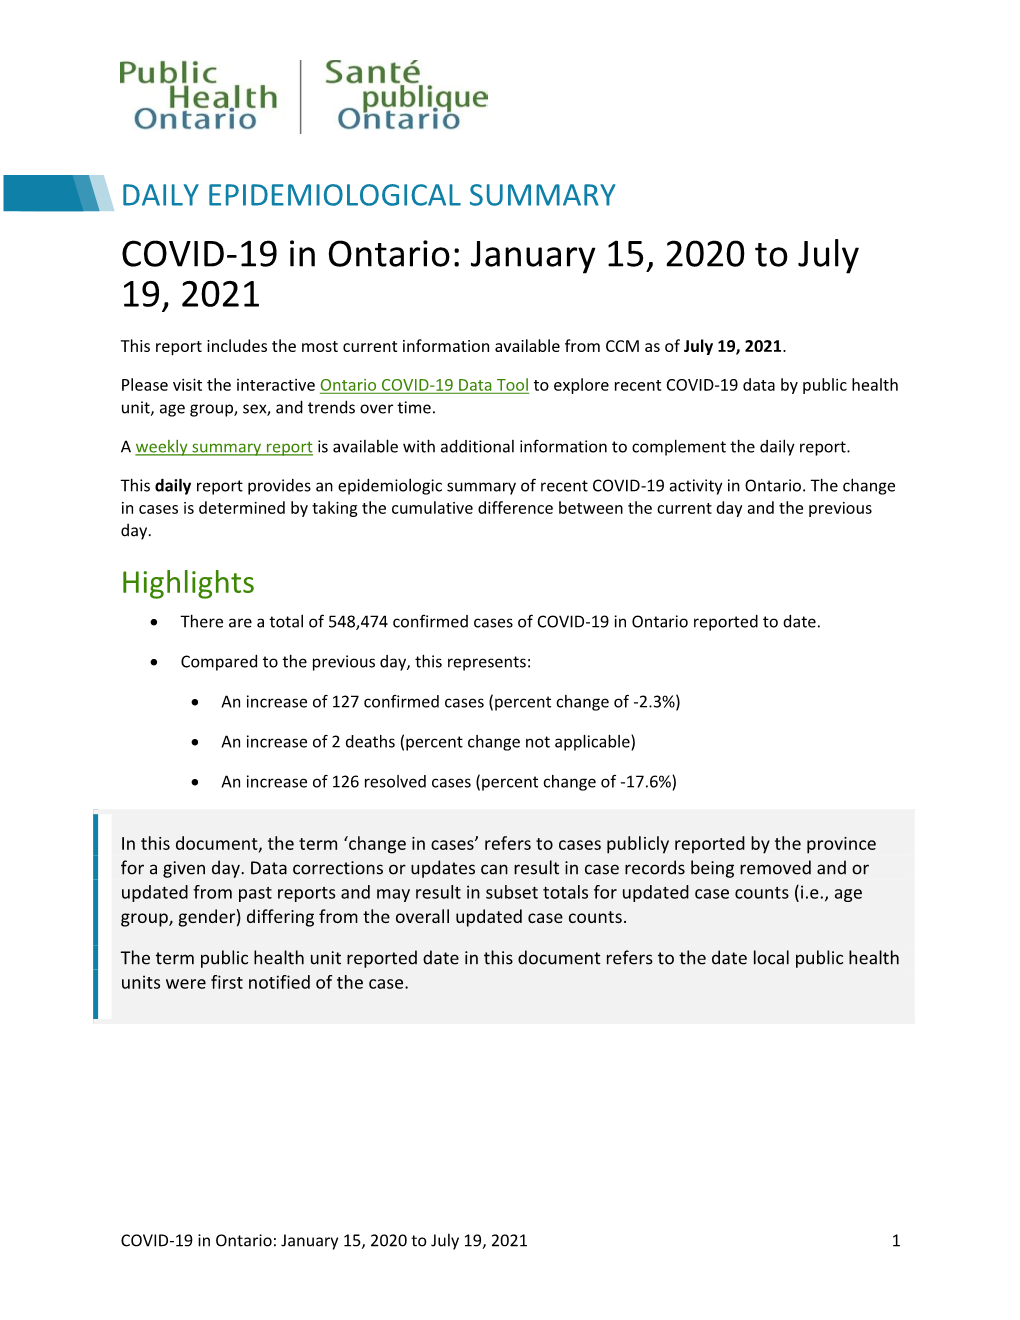 COVID-19 in Ontario: January 15, 2020 to July 19, 2021